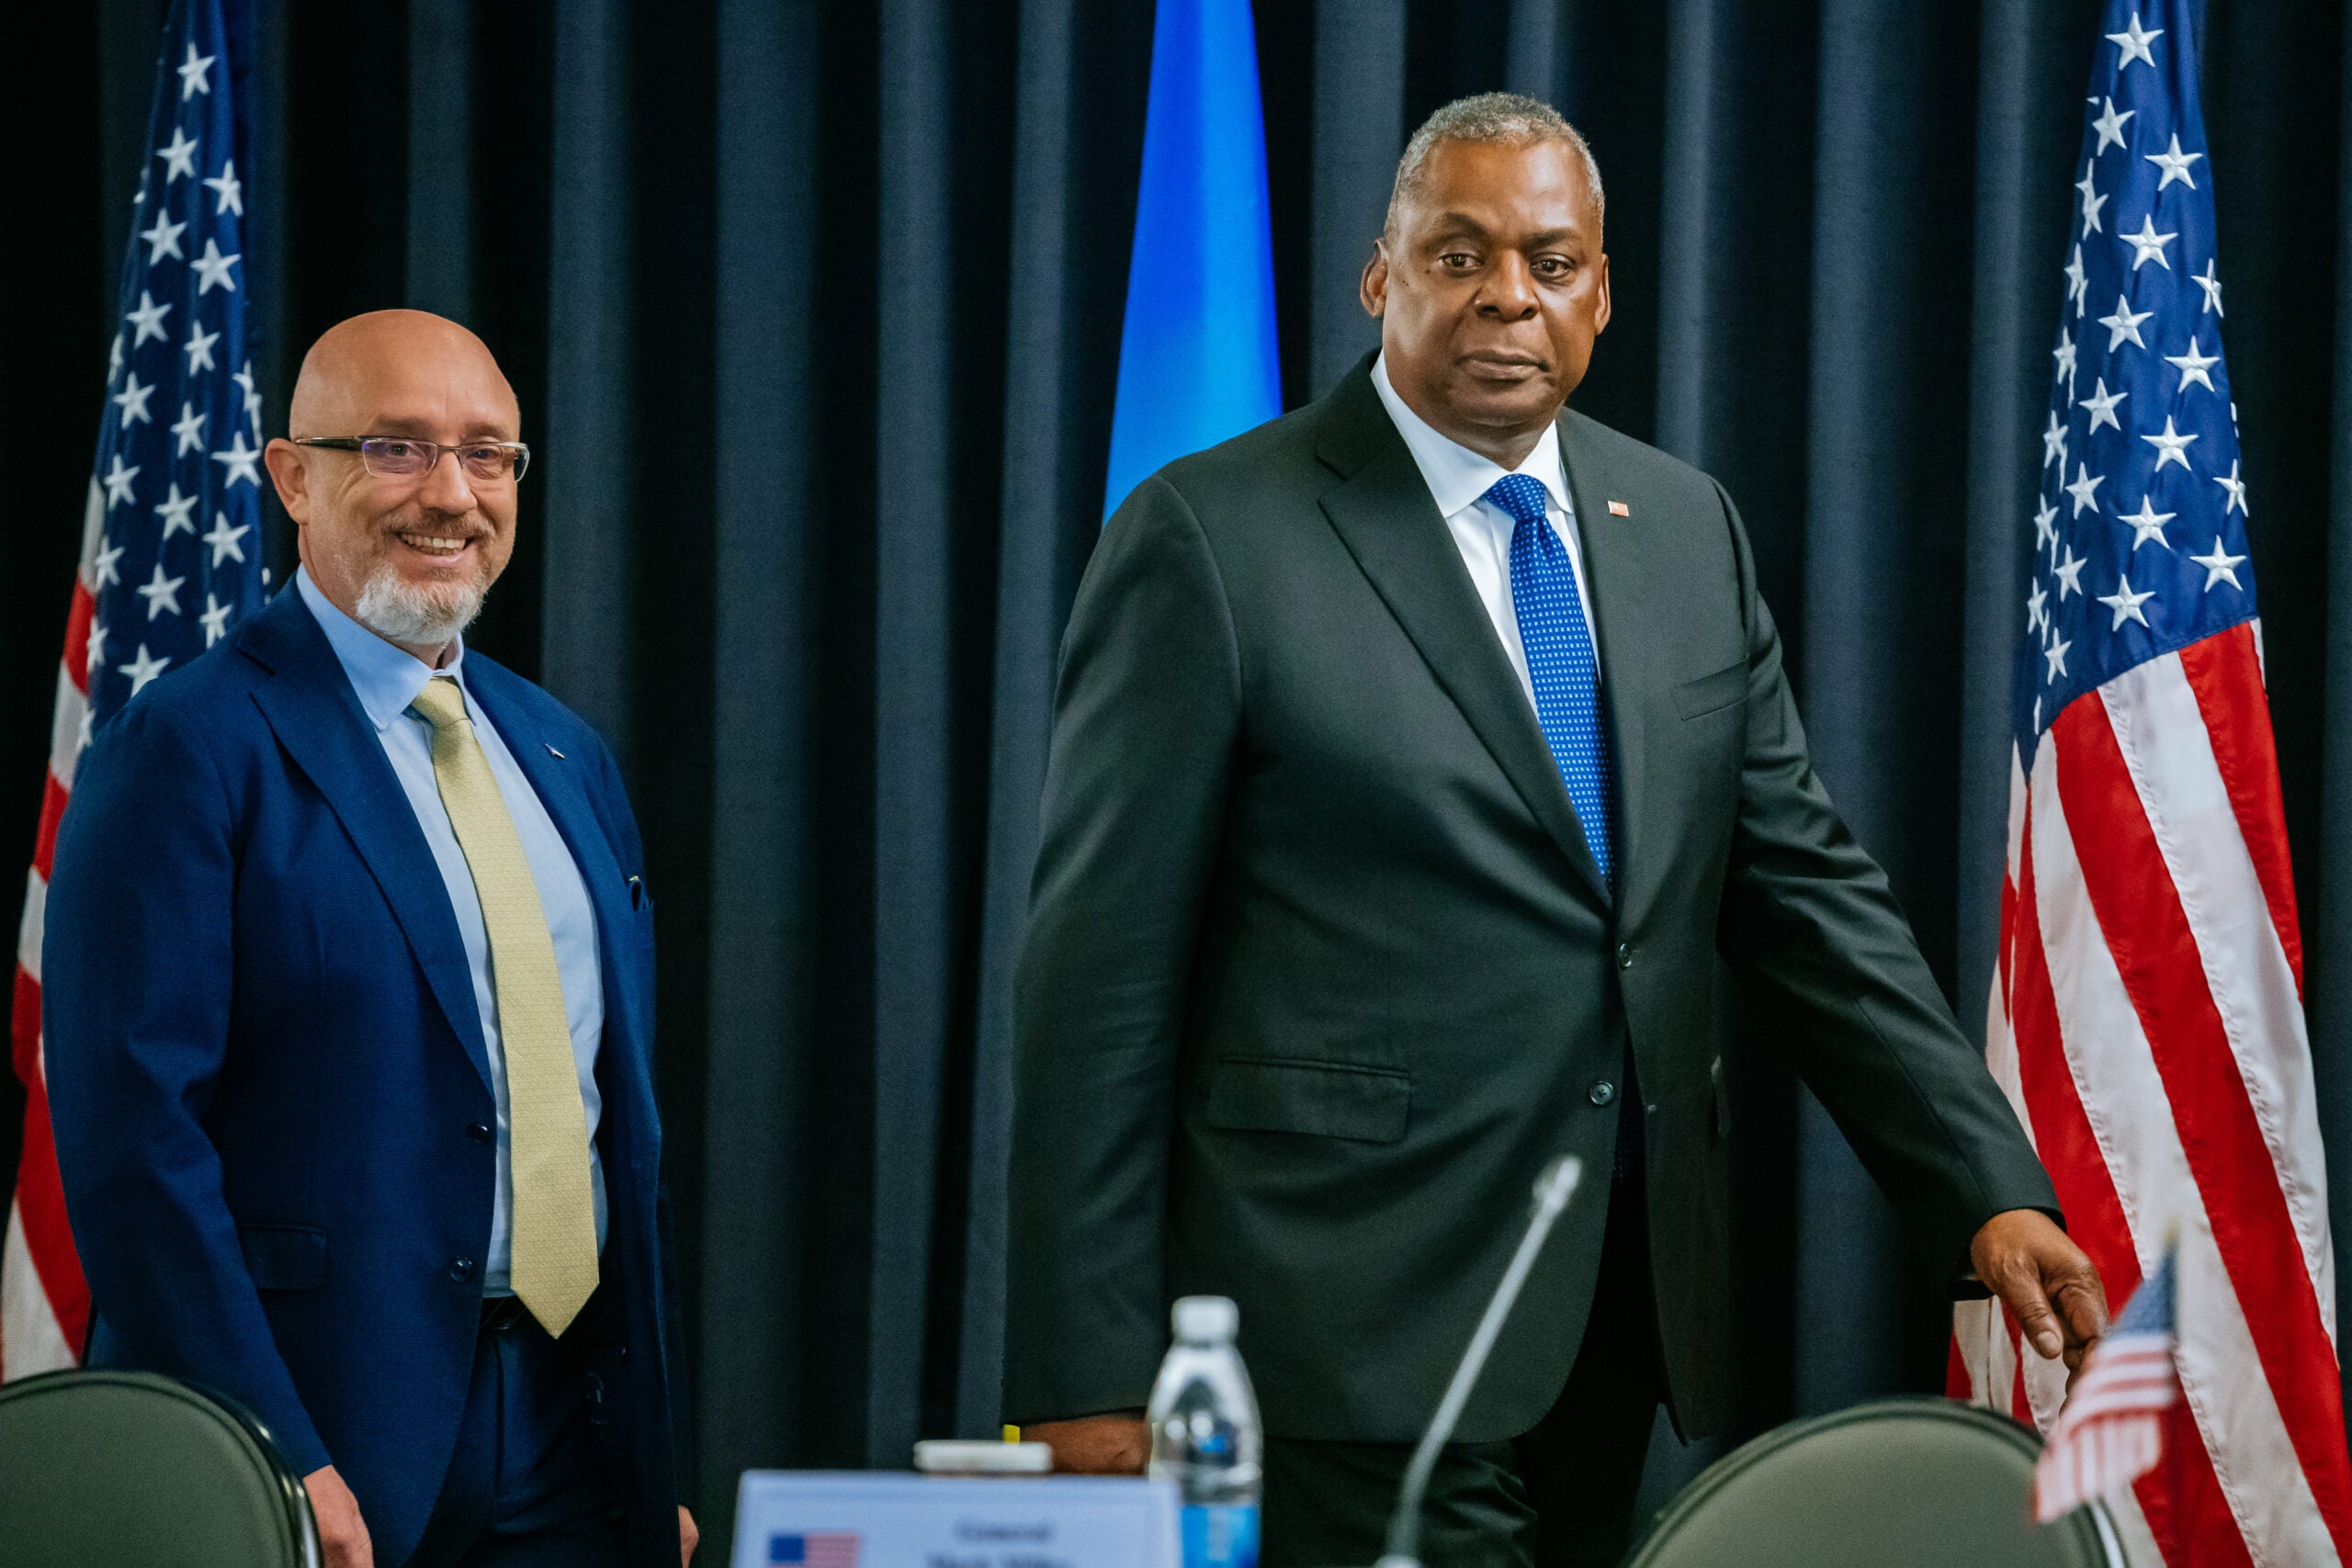 U.S. Secretary of Defense Lloyd Austin (L) and Ukrainian Defense Minister Oleksii Reznikov (R) attend a meeting of the Ukraine Defence Contact Group at tRamstein air base on Sept. 08. Thomas Niedermueller/Getty Images